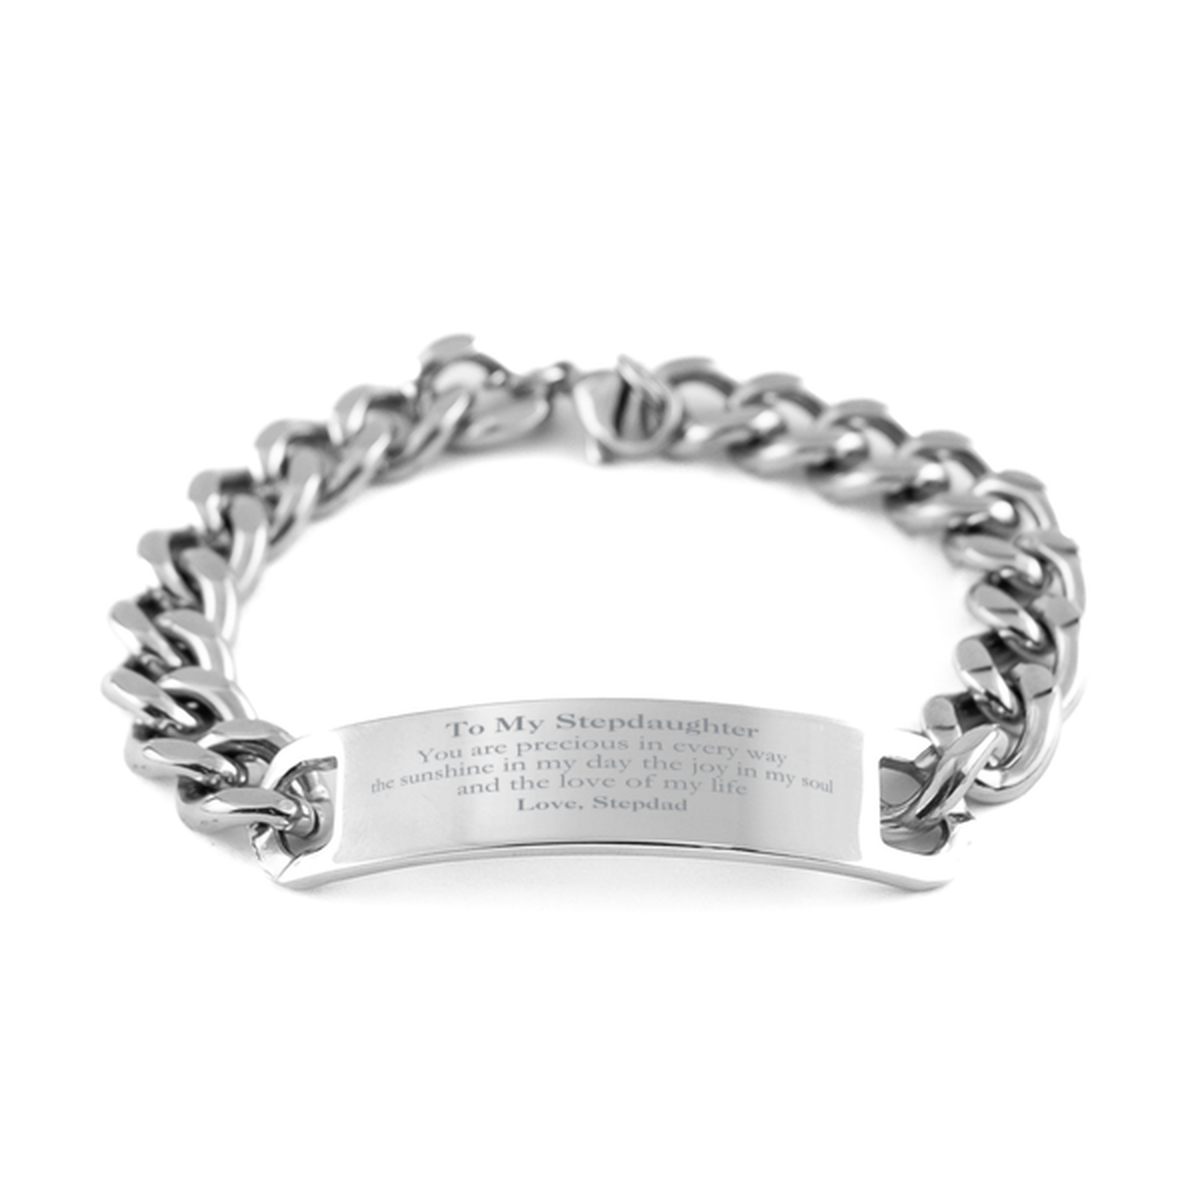 Graduation Gifts for Stepdaughter Cuban Chain Stainless Steel Bracelet Present from Stepdad, Christmas Stepdaughter Birthday Gifts Stepdaughter You are precious in every way the sunshine in my day. Love, Stepdad